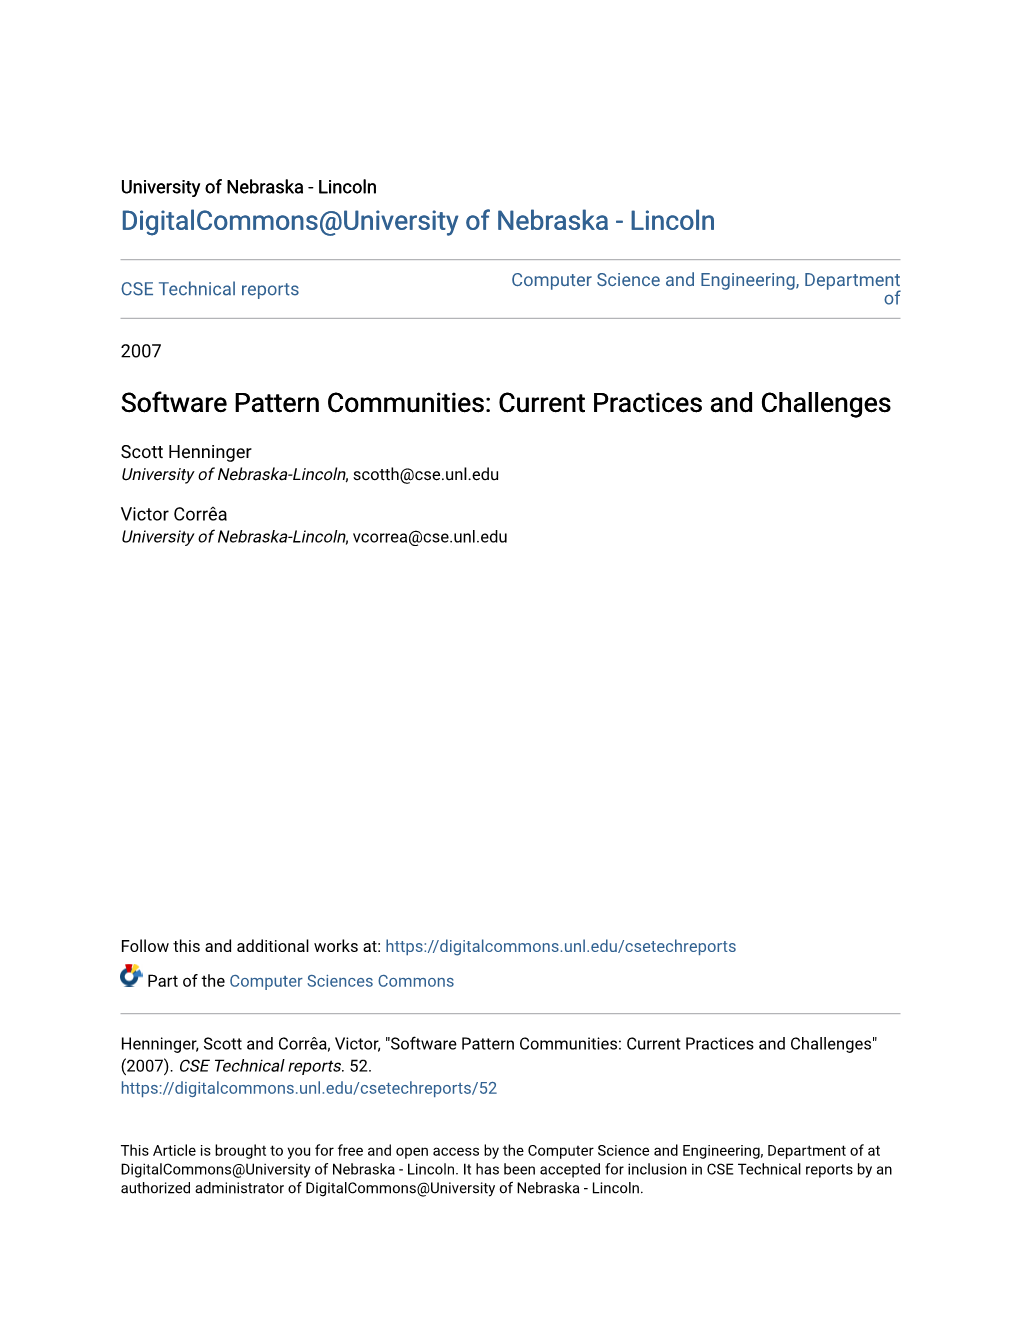 Software Pattern Communities: Current Practices and Challenges